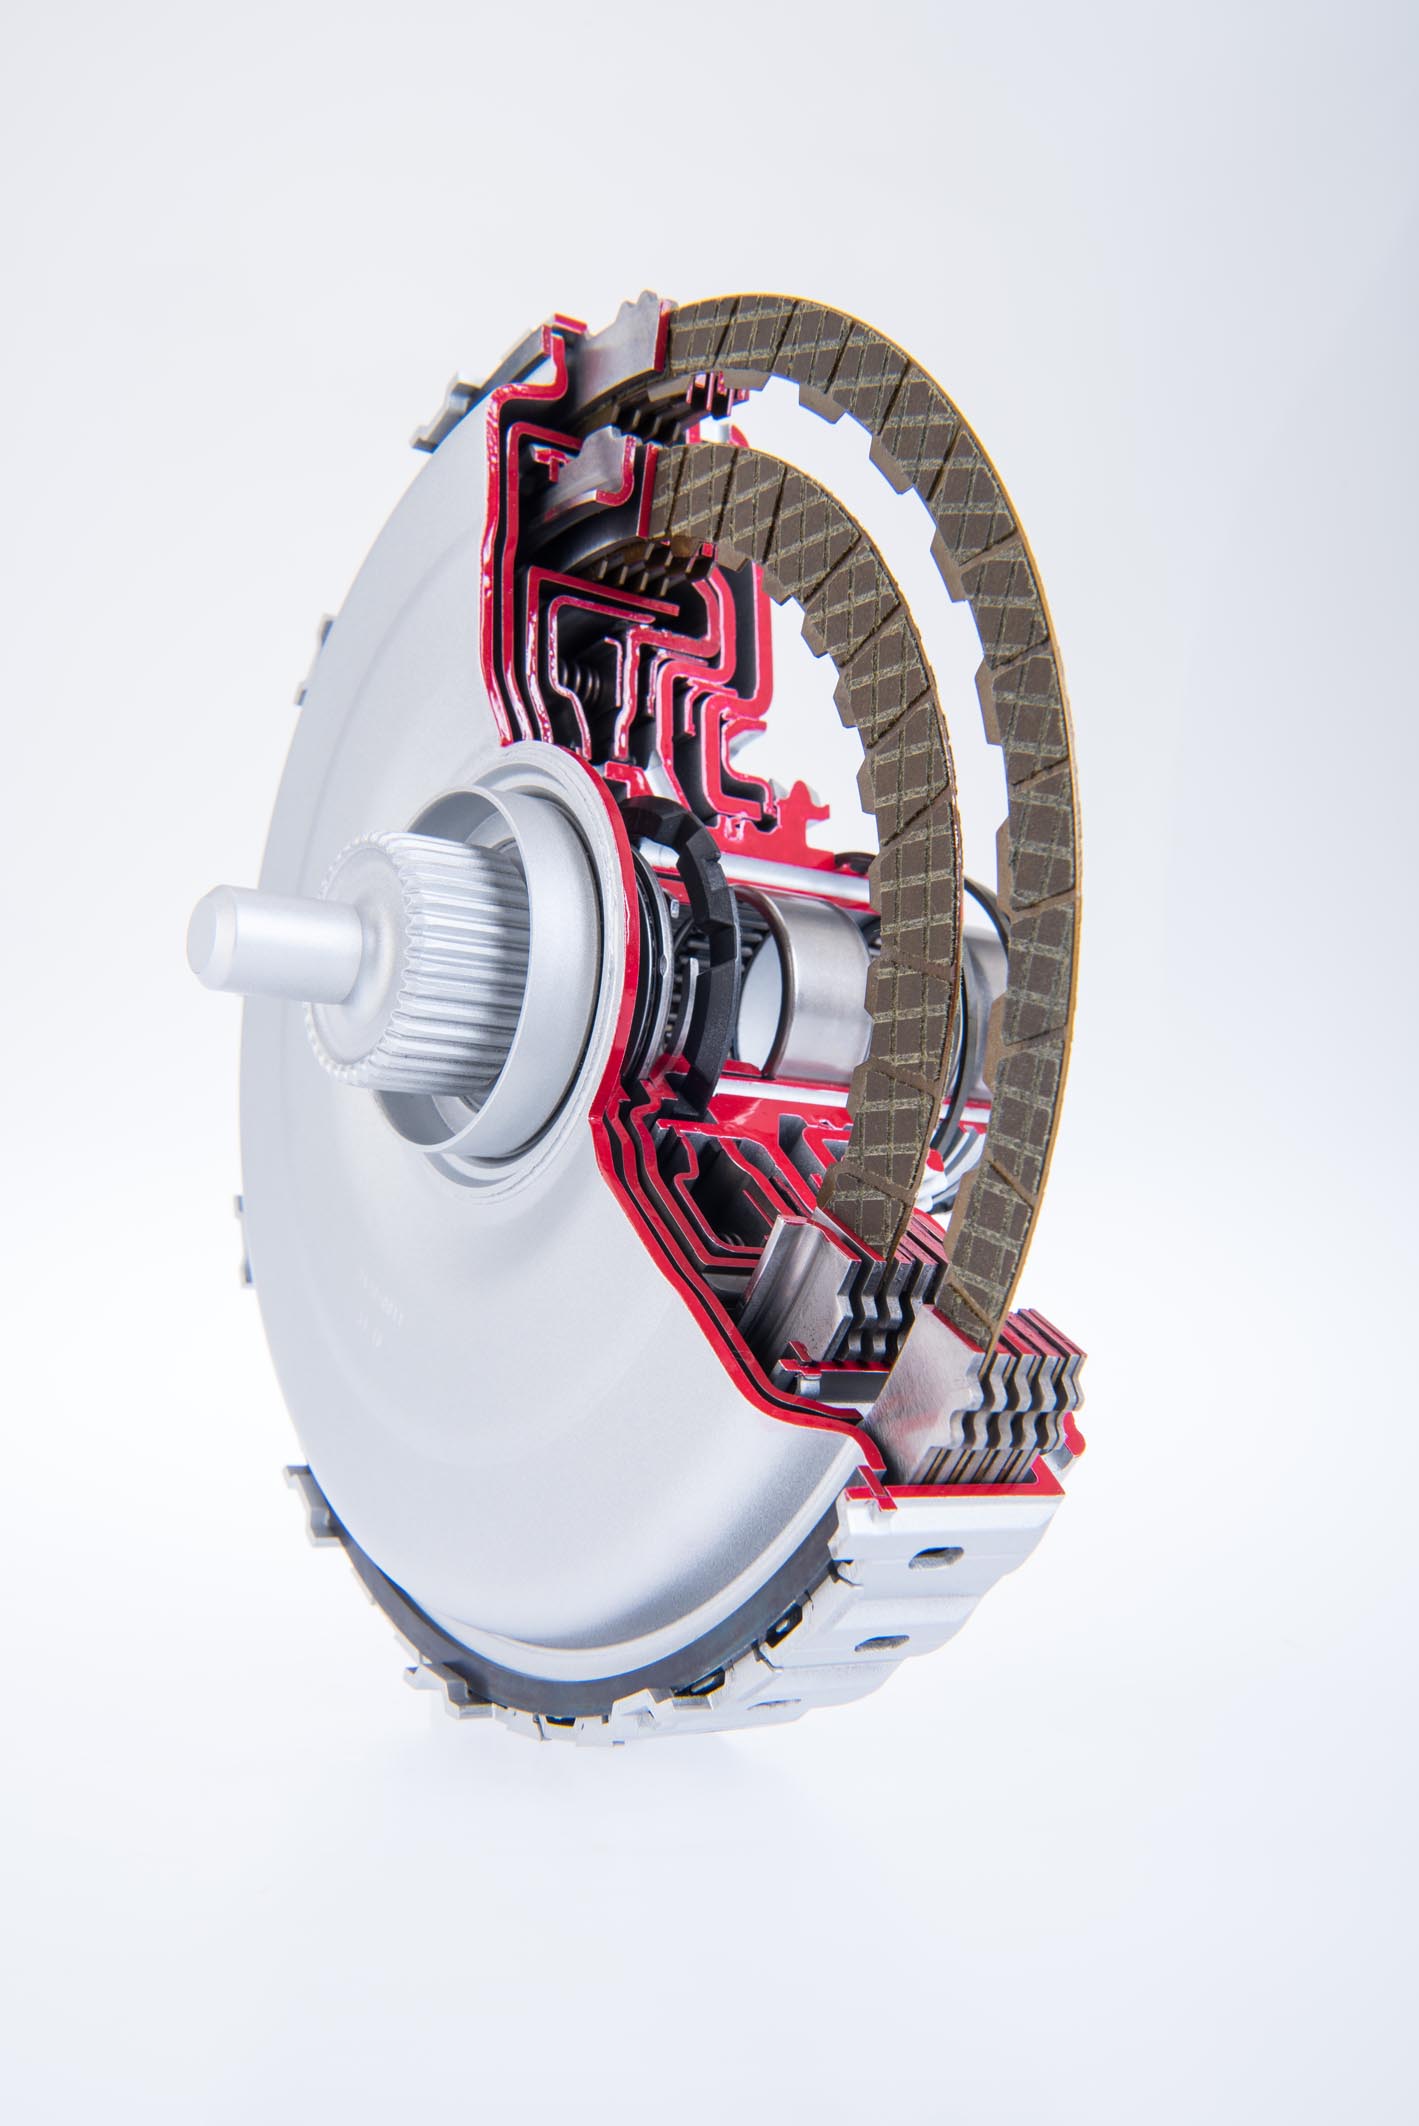 Continuous forward - dual clutch module in lateral section view